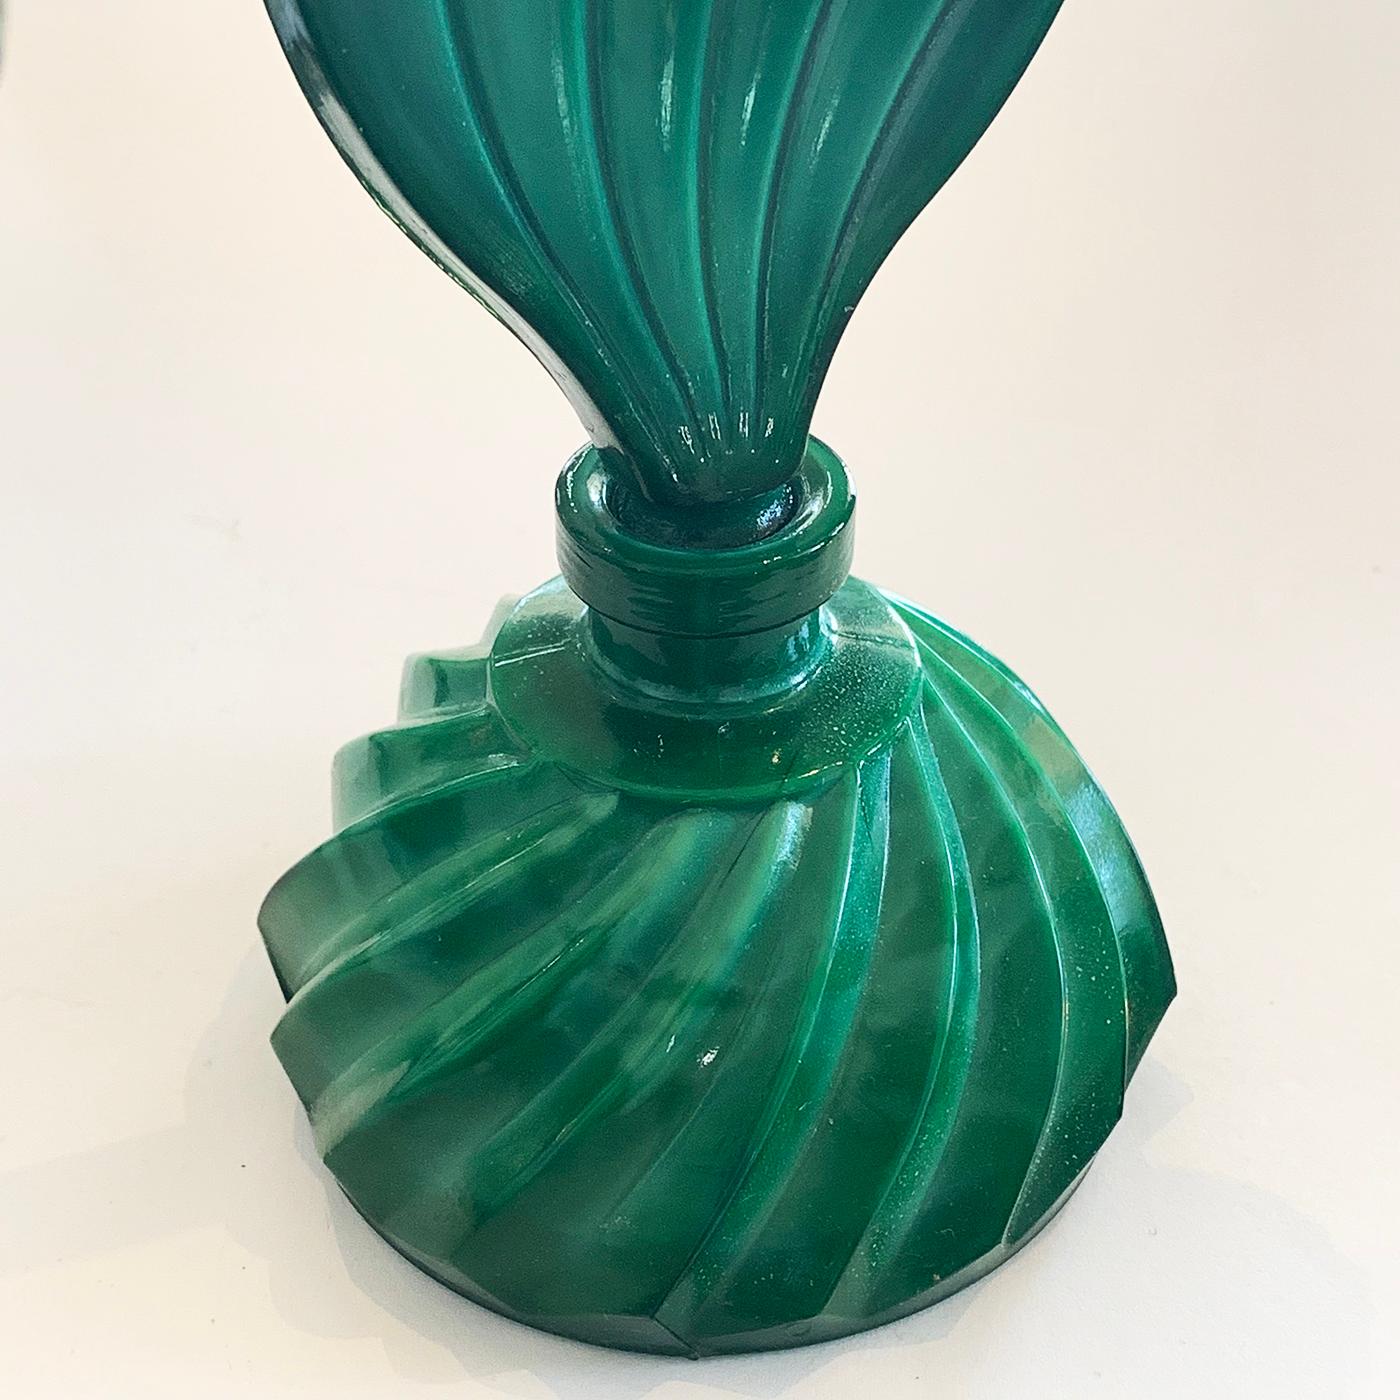 Art Deco Czechoslovakian green malachite glass perfume flask, all in perfect condition, including the stopper and neck seal. The bottle base is in the shape of a tapering twist reeding sides, and the stopper is in the shape of a feather above the